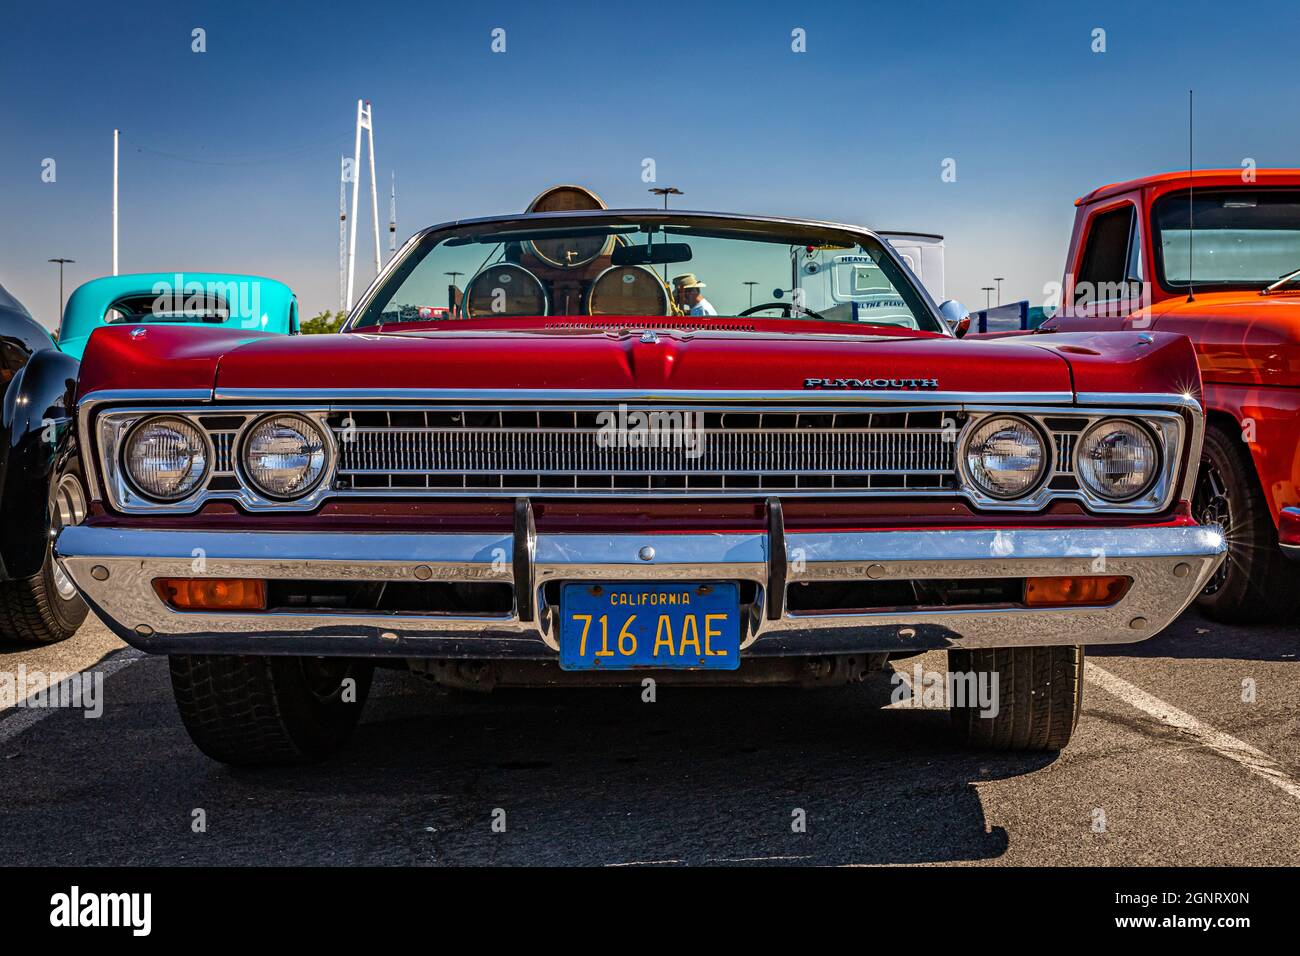 Reno, NV - August 4, 2021: 1969 Plymouth Fury III Convertible at a local car show. Stock Photo